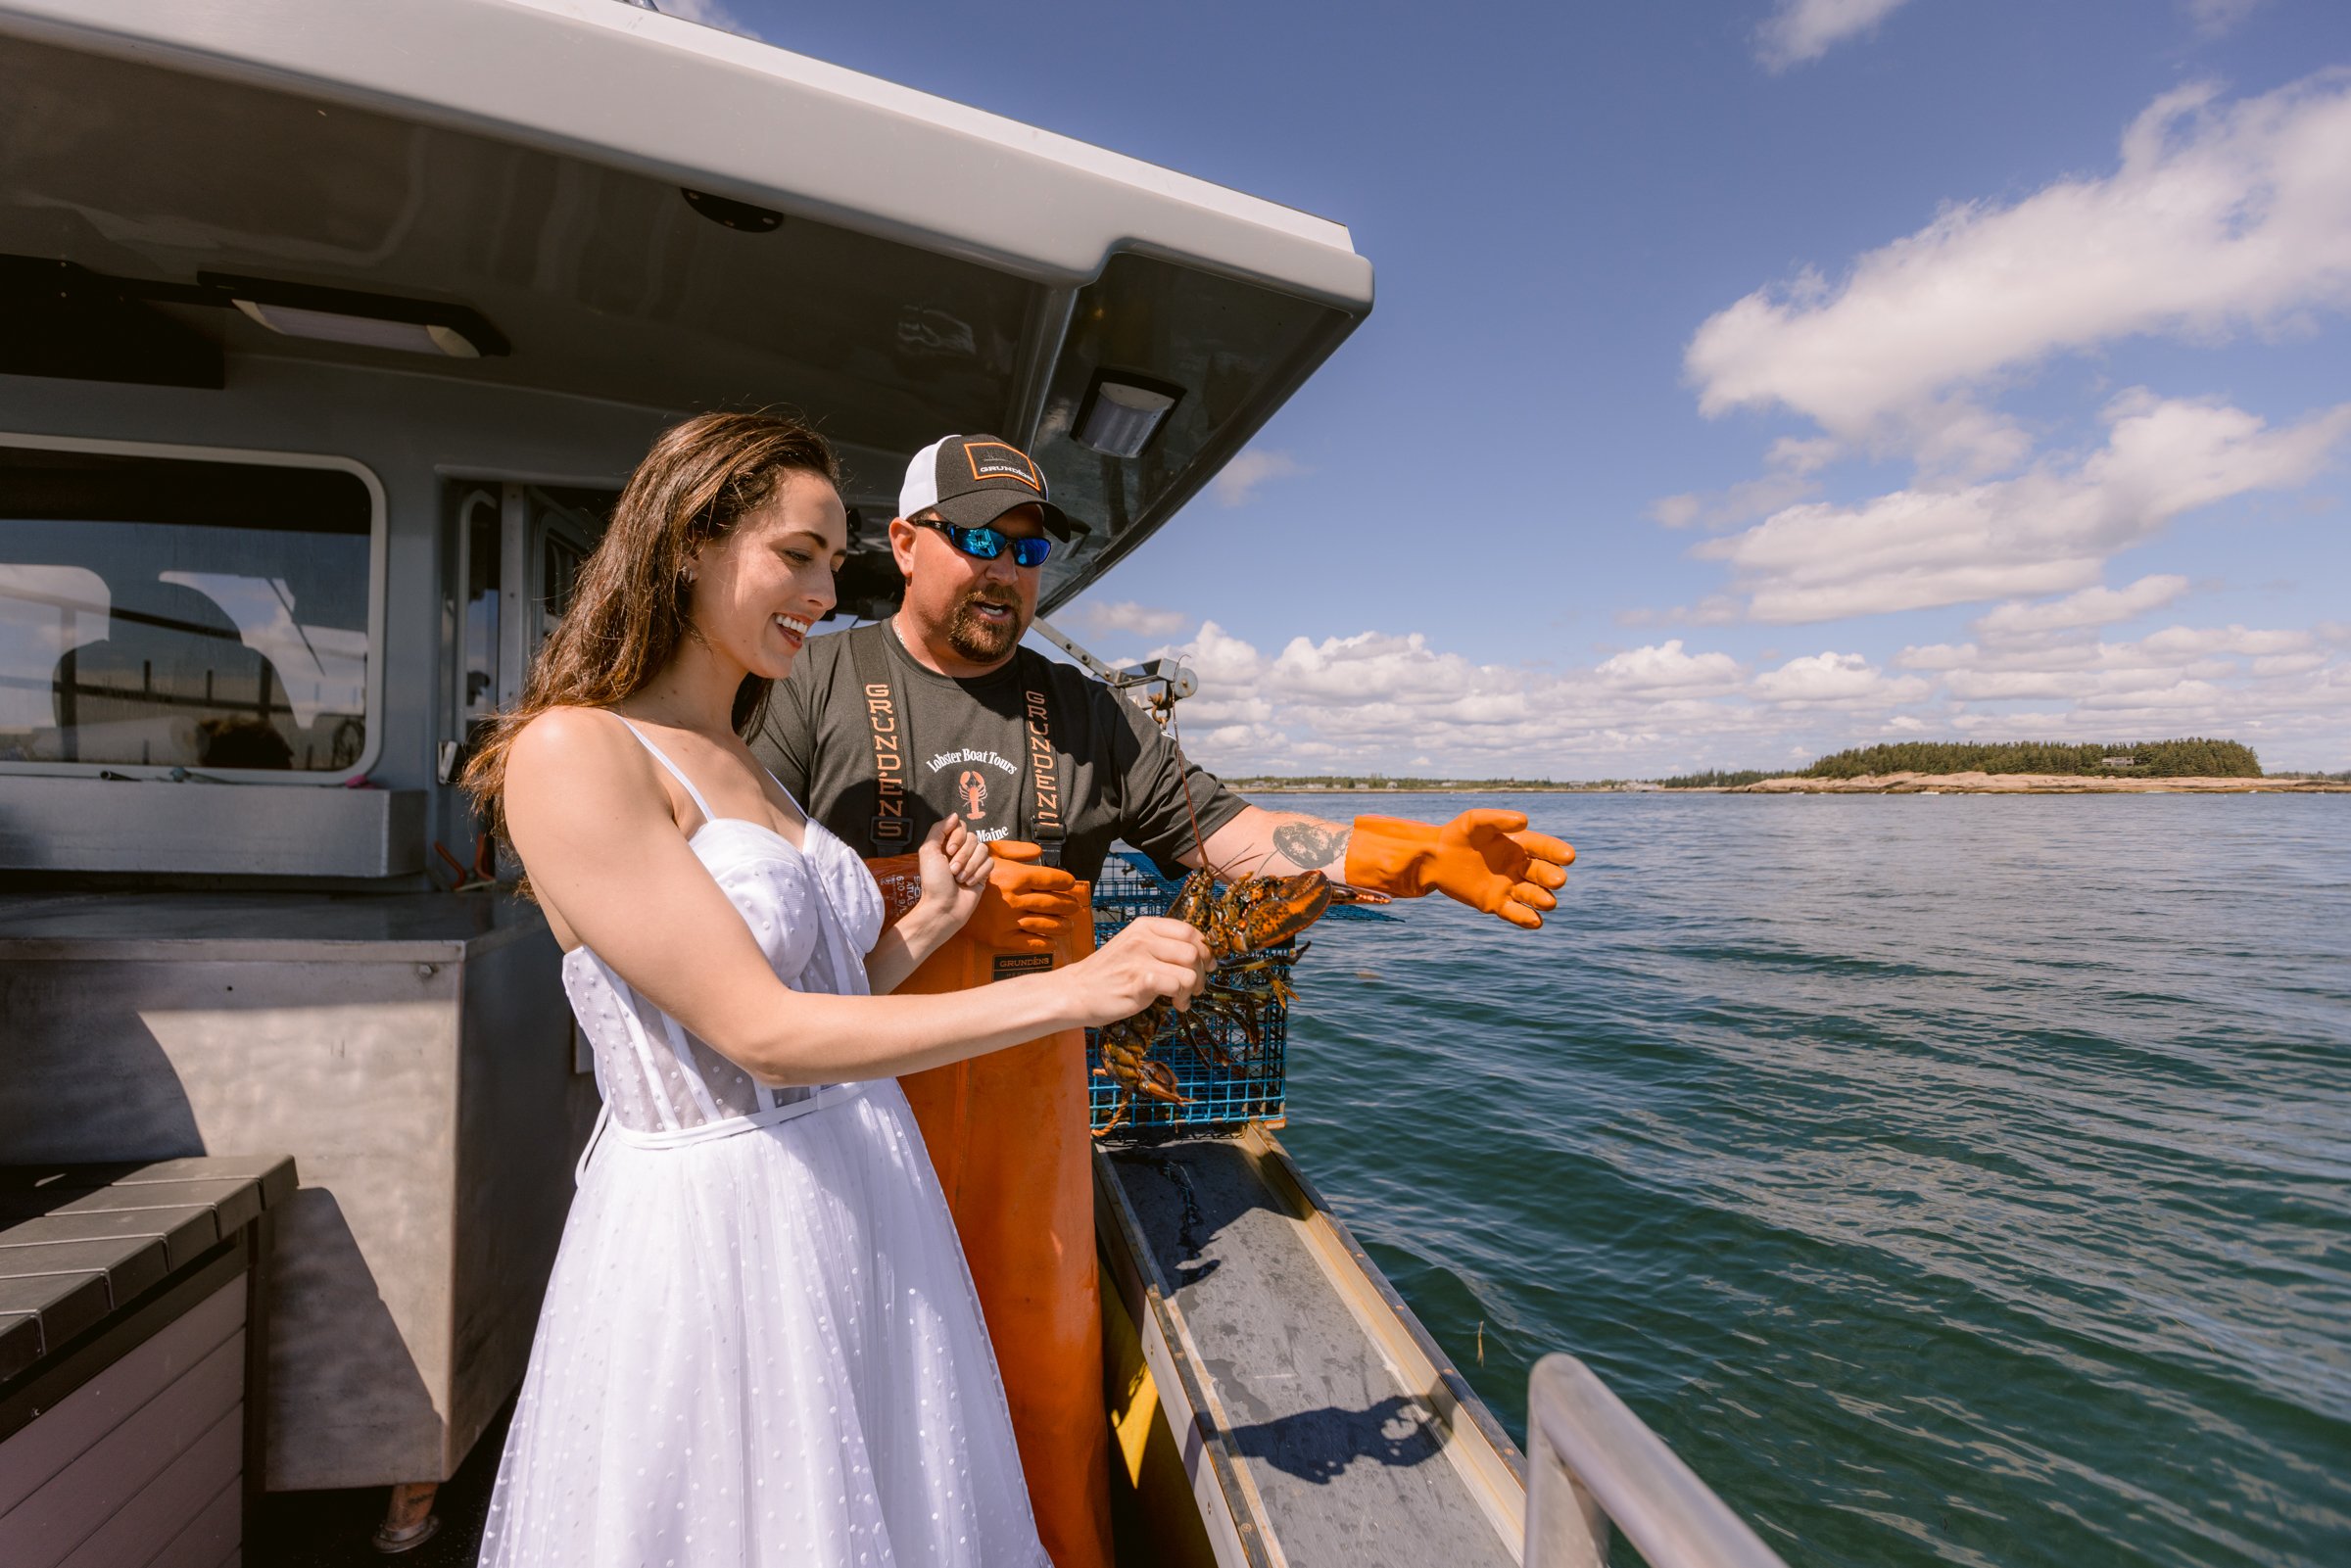 Acadia-National-park-how-to-elope-lobster-boat-tour-maine-MoonRisingPhotography-426.jpg